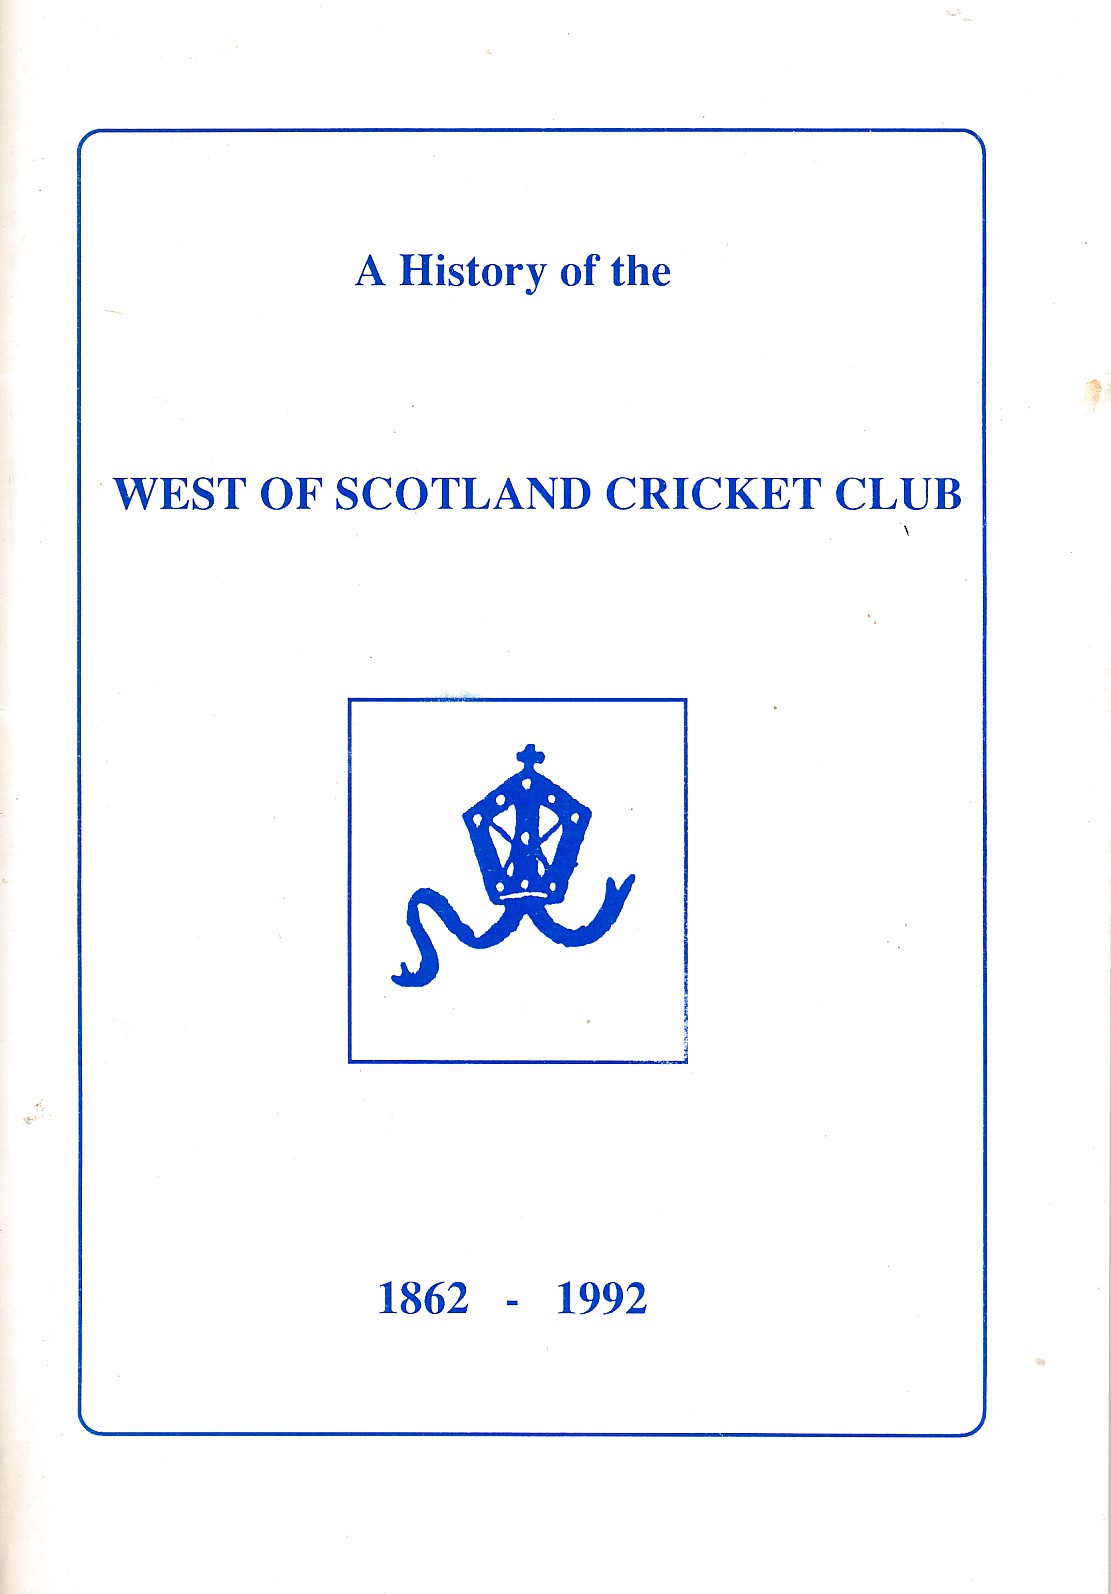 The History of The West of Scotland Cricket Club 1862-1992